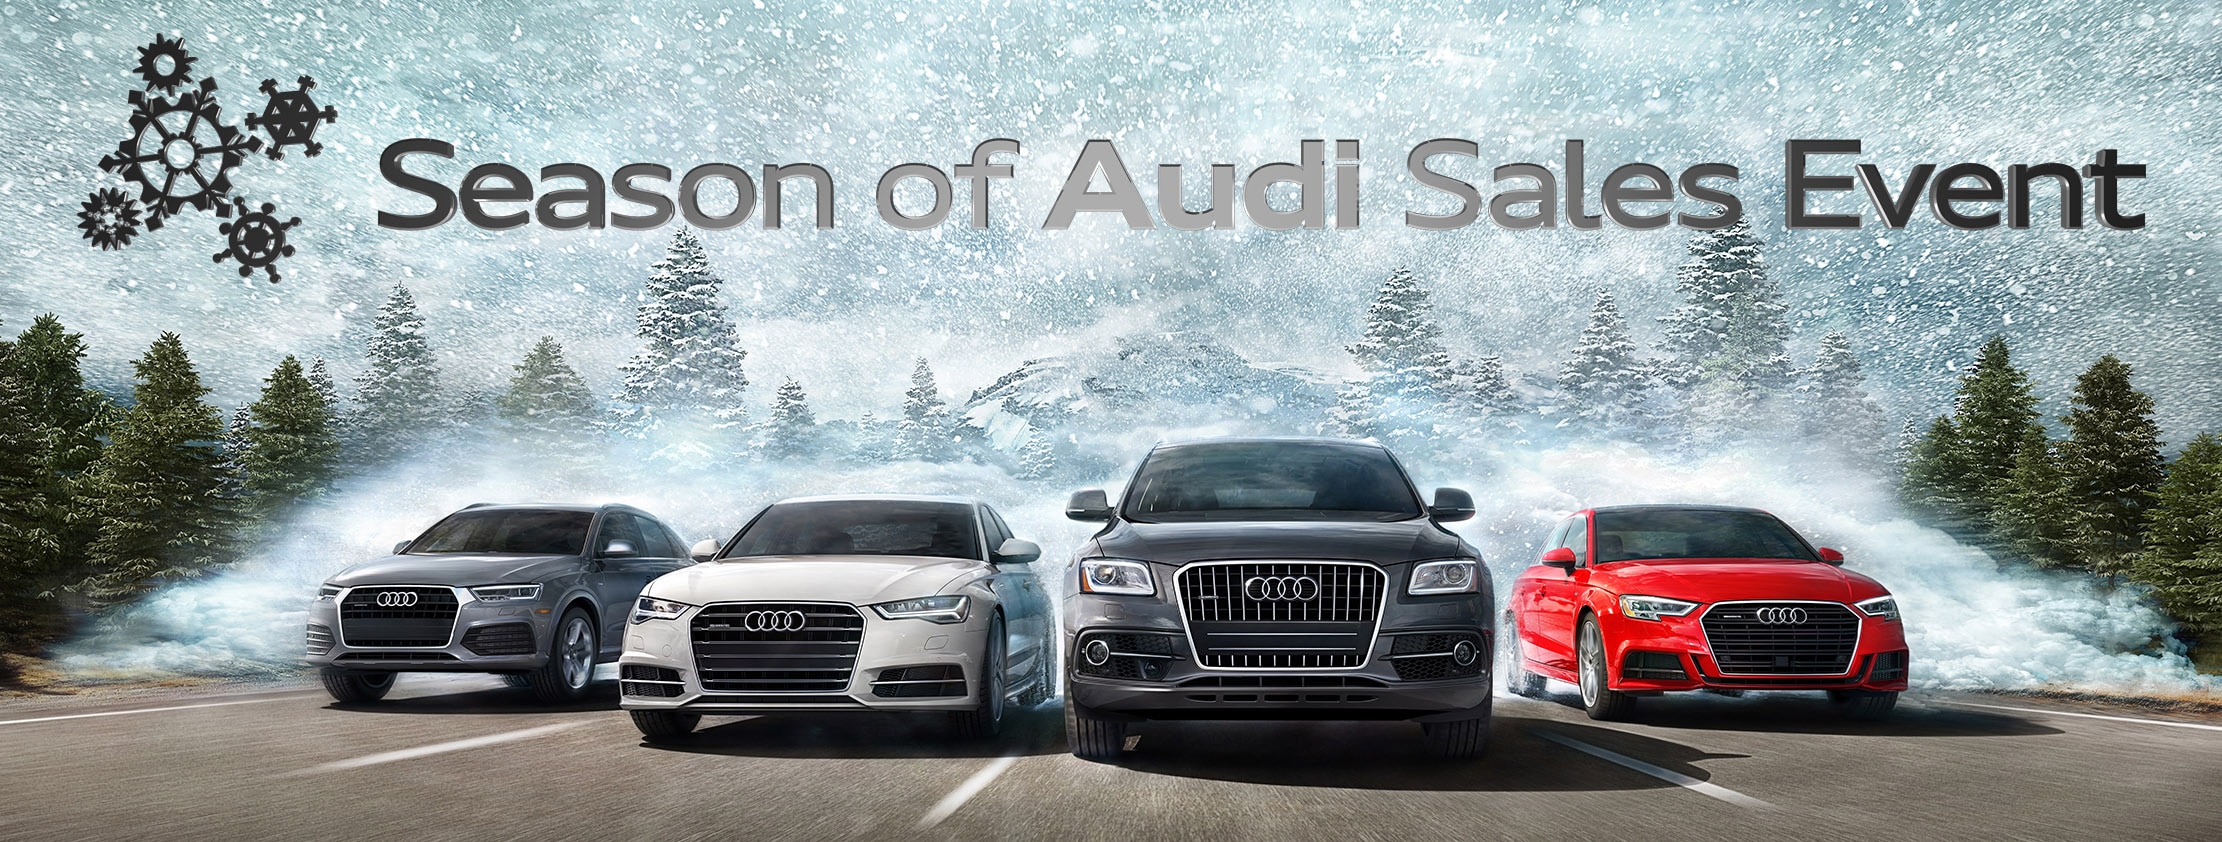 The Season of Audi Sales Event is even better at Prestige Audi